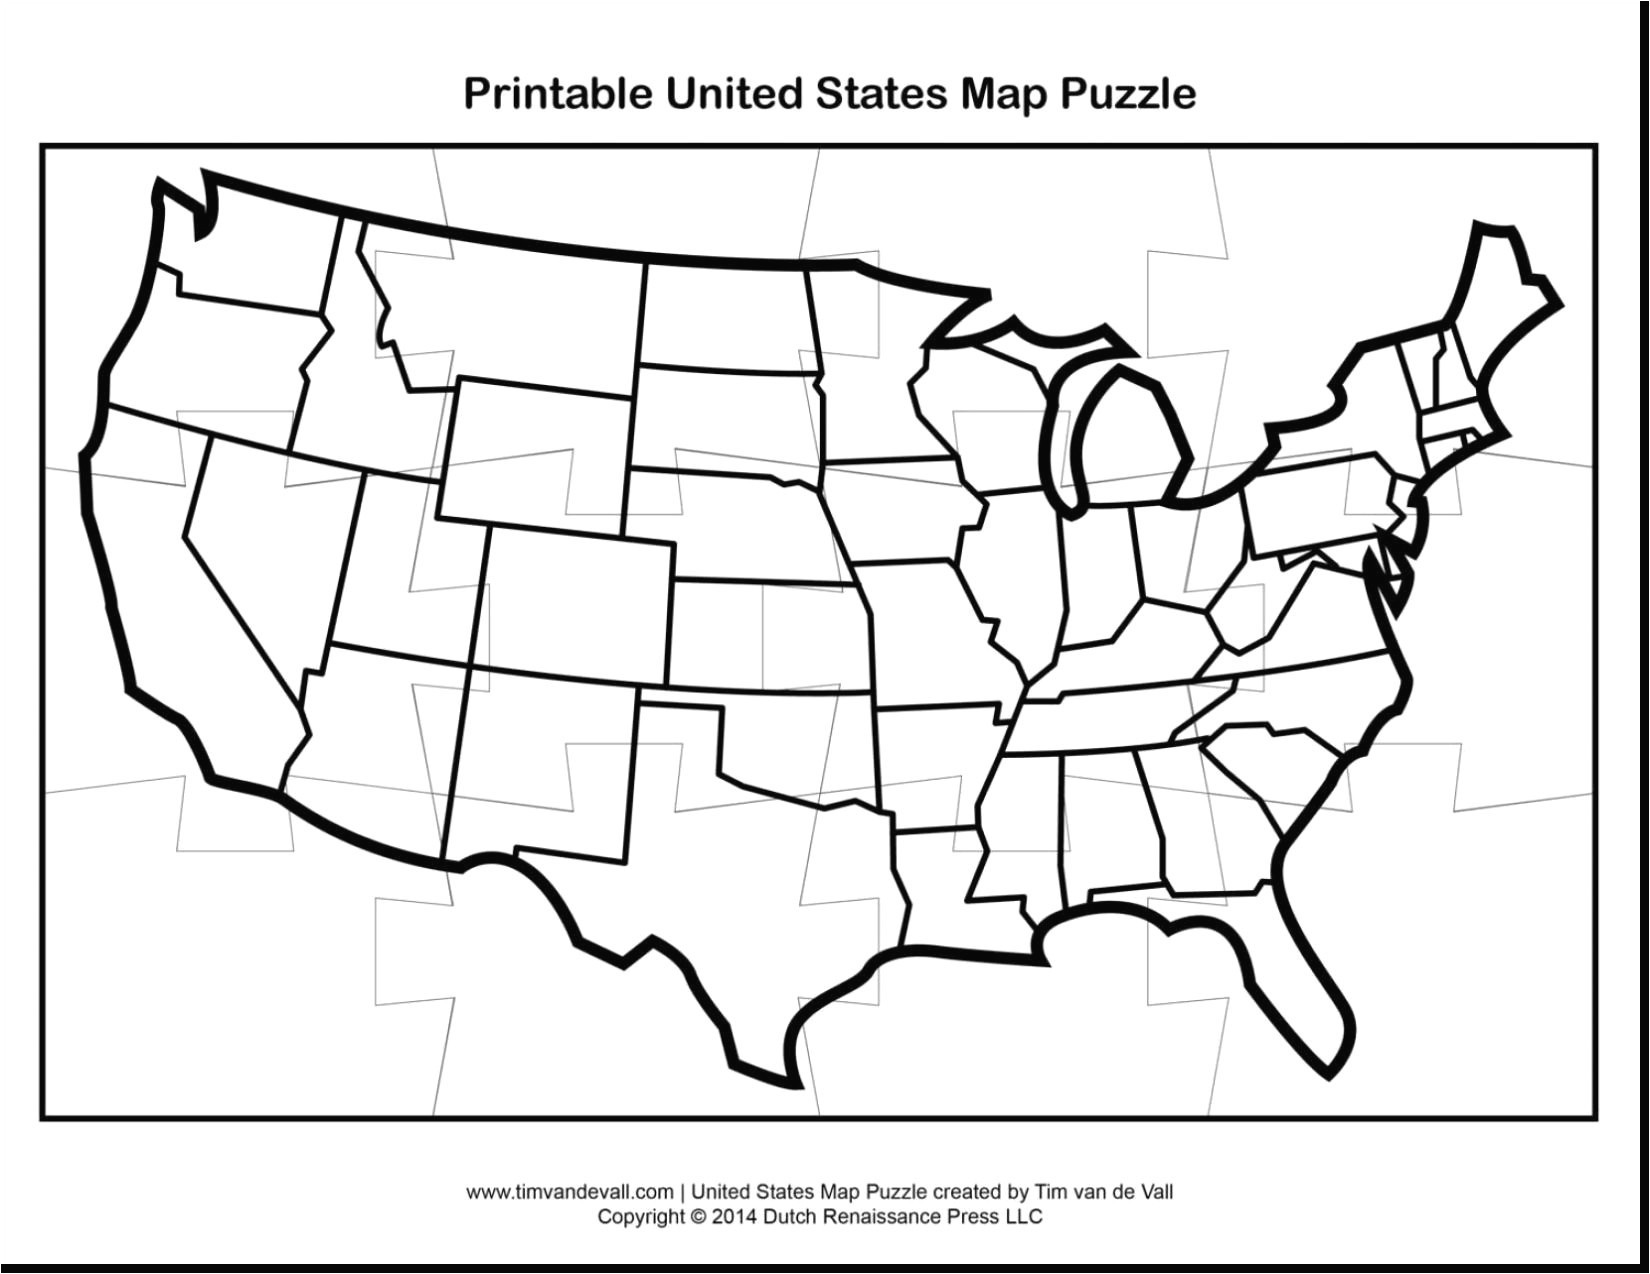 Drawing 50 States How to Draw A United States Map Refrence United States Map Easy to